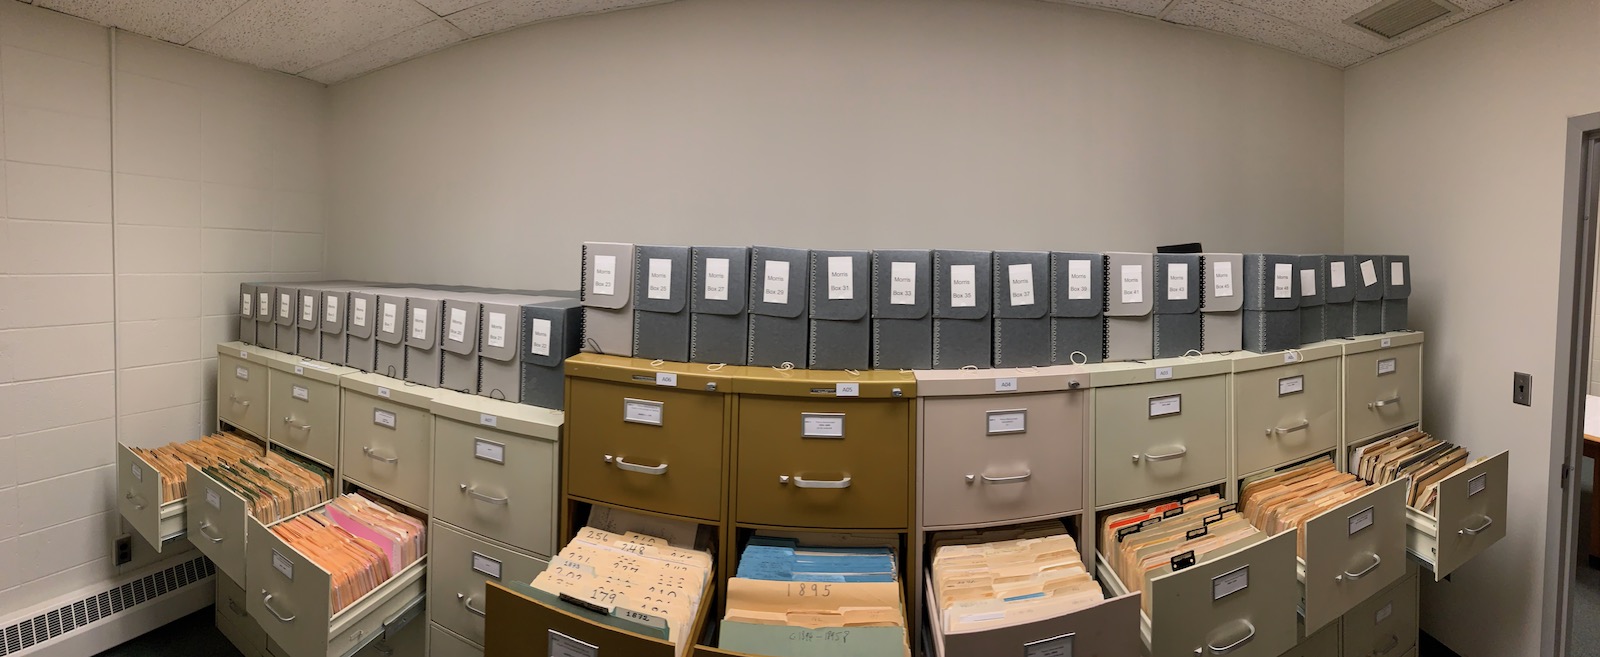 picture showing the inside of PEP's resources room with Charles Morris archives